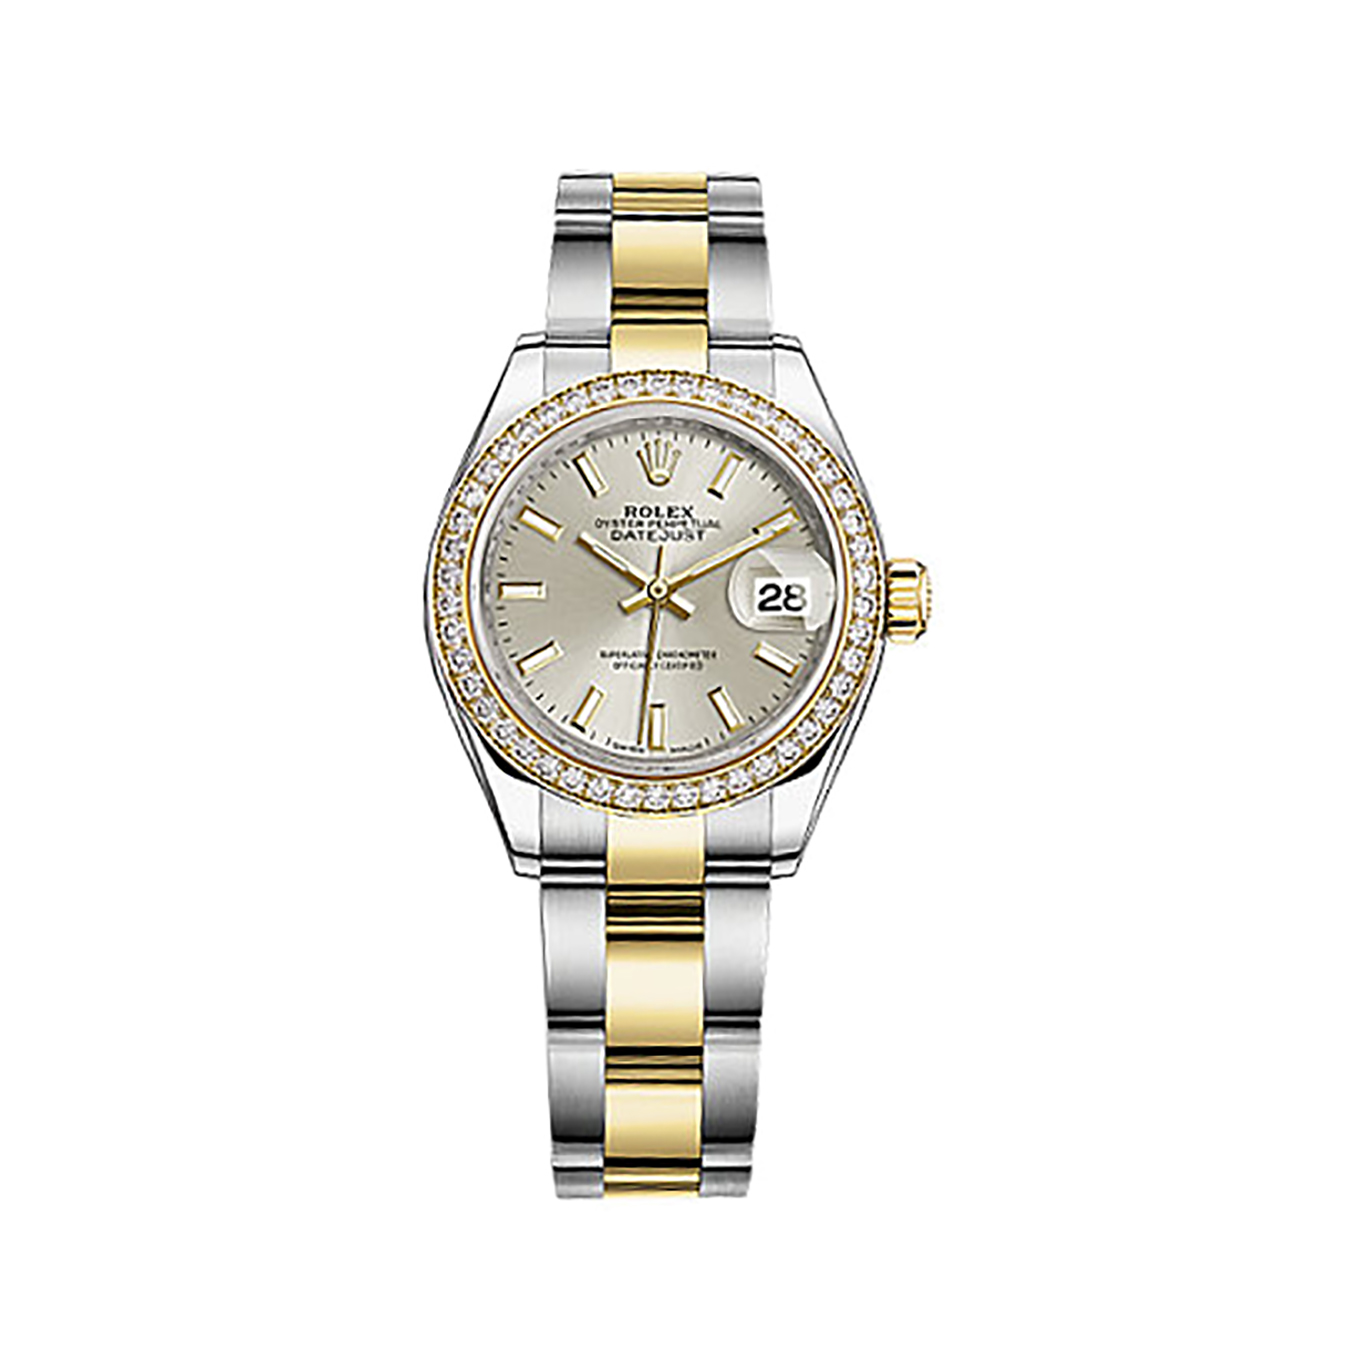 Lady-Datejust 28 279383RBR Gold & Stainless Steel & Diamonds Watch (Silver)